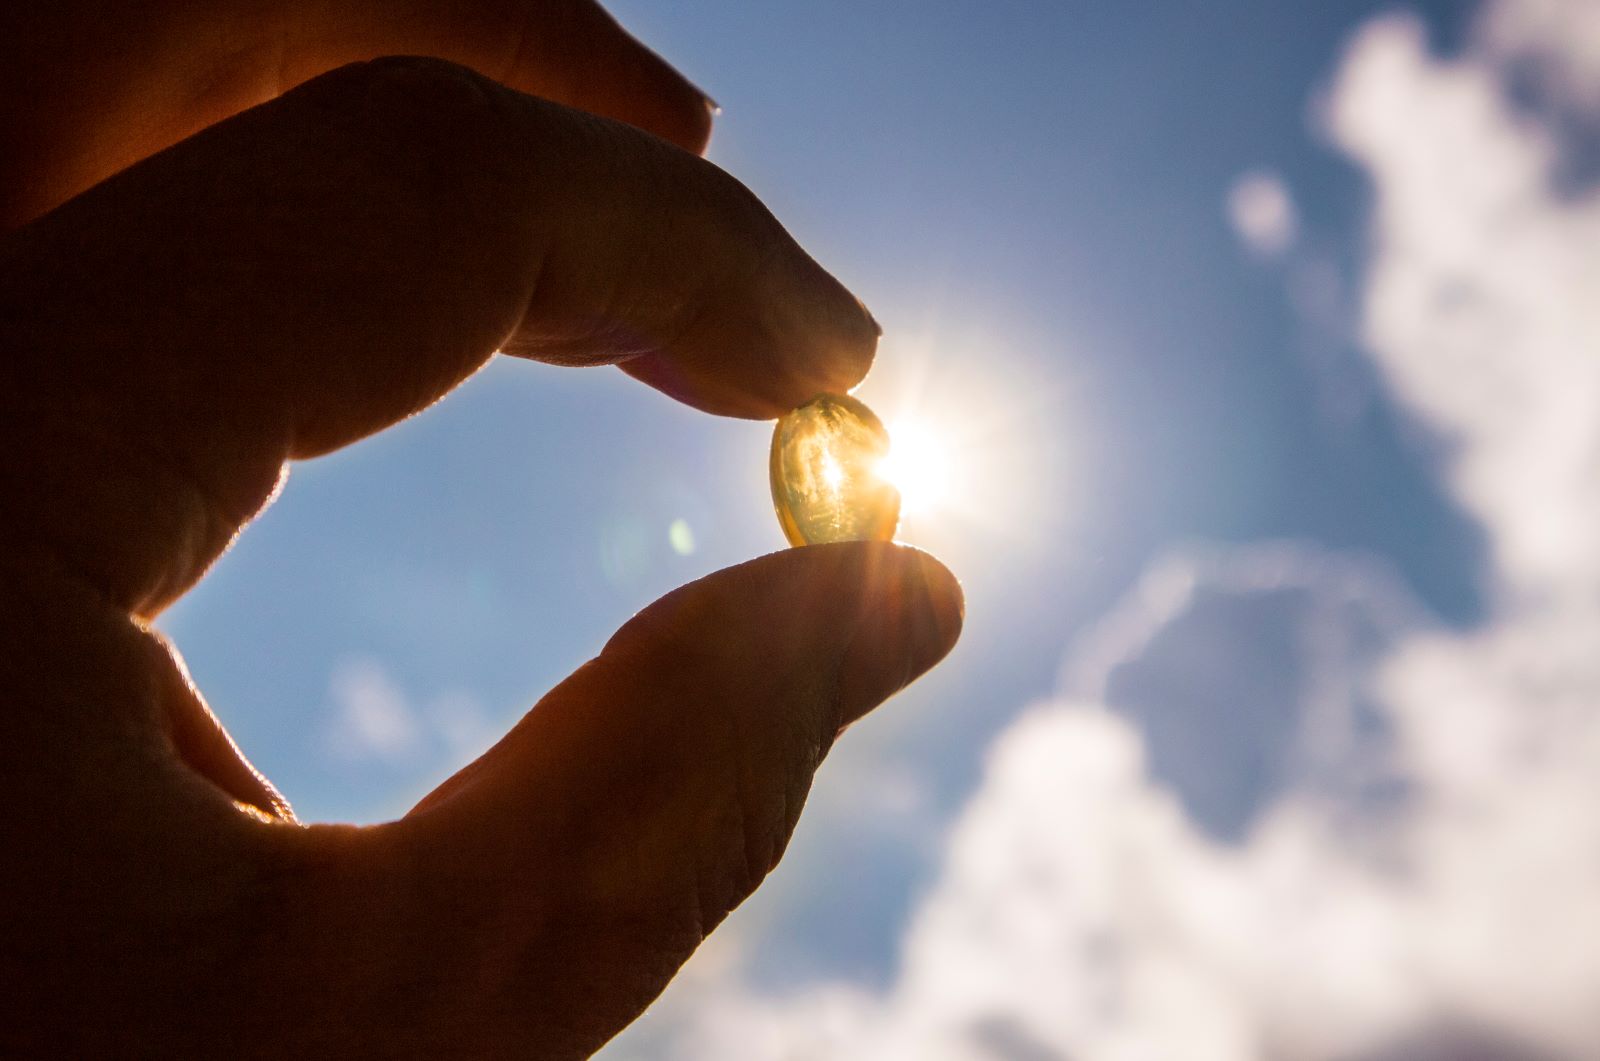 New Studies Cast Doubts on Vitamin D Supplements, but Do the Experts Agree?